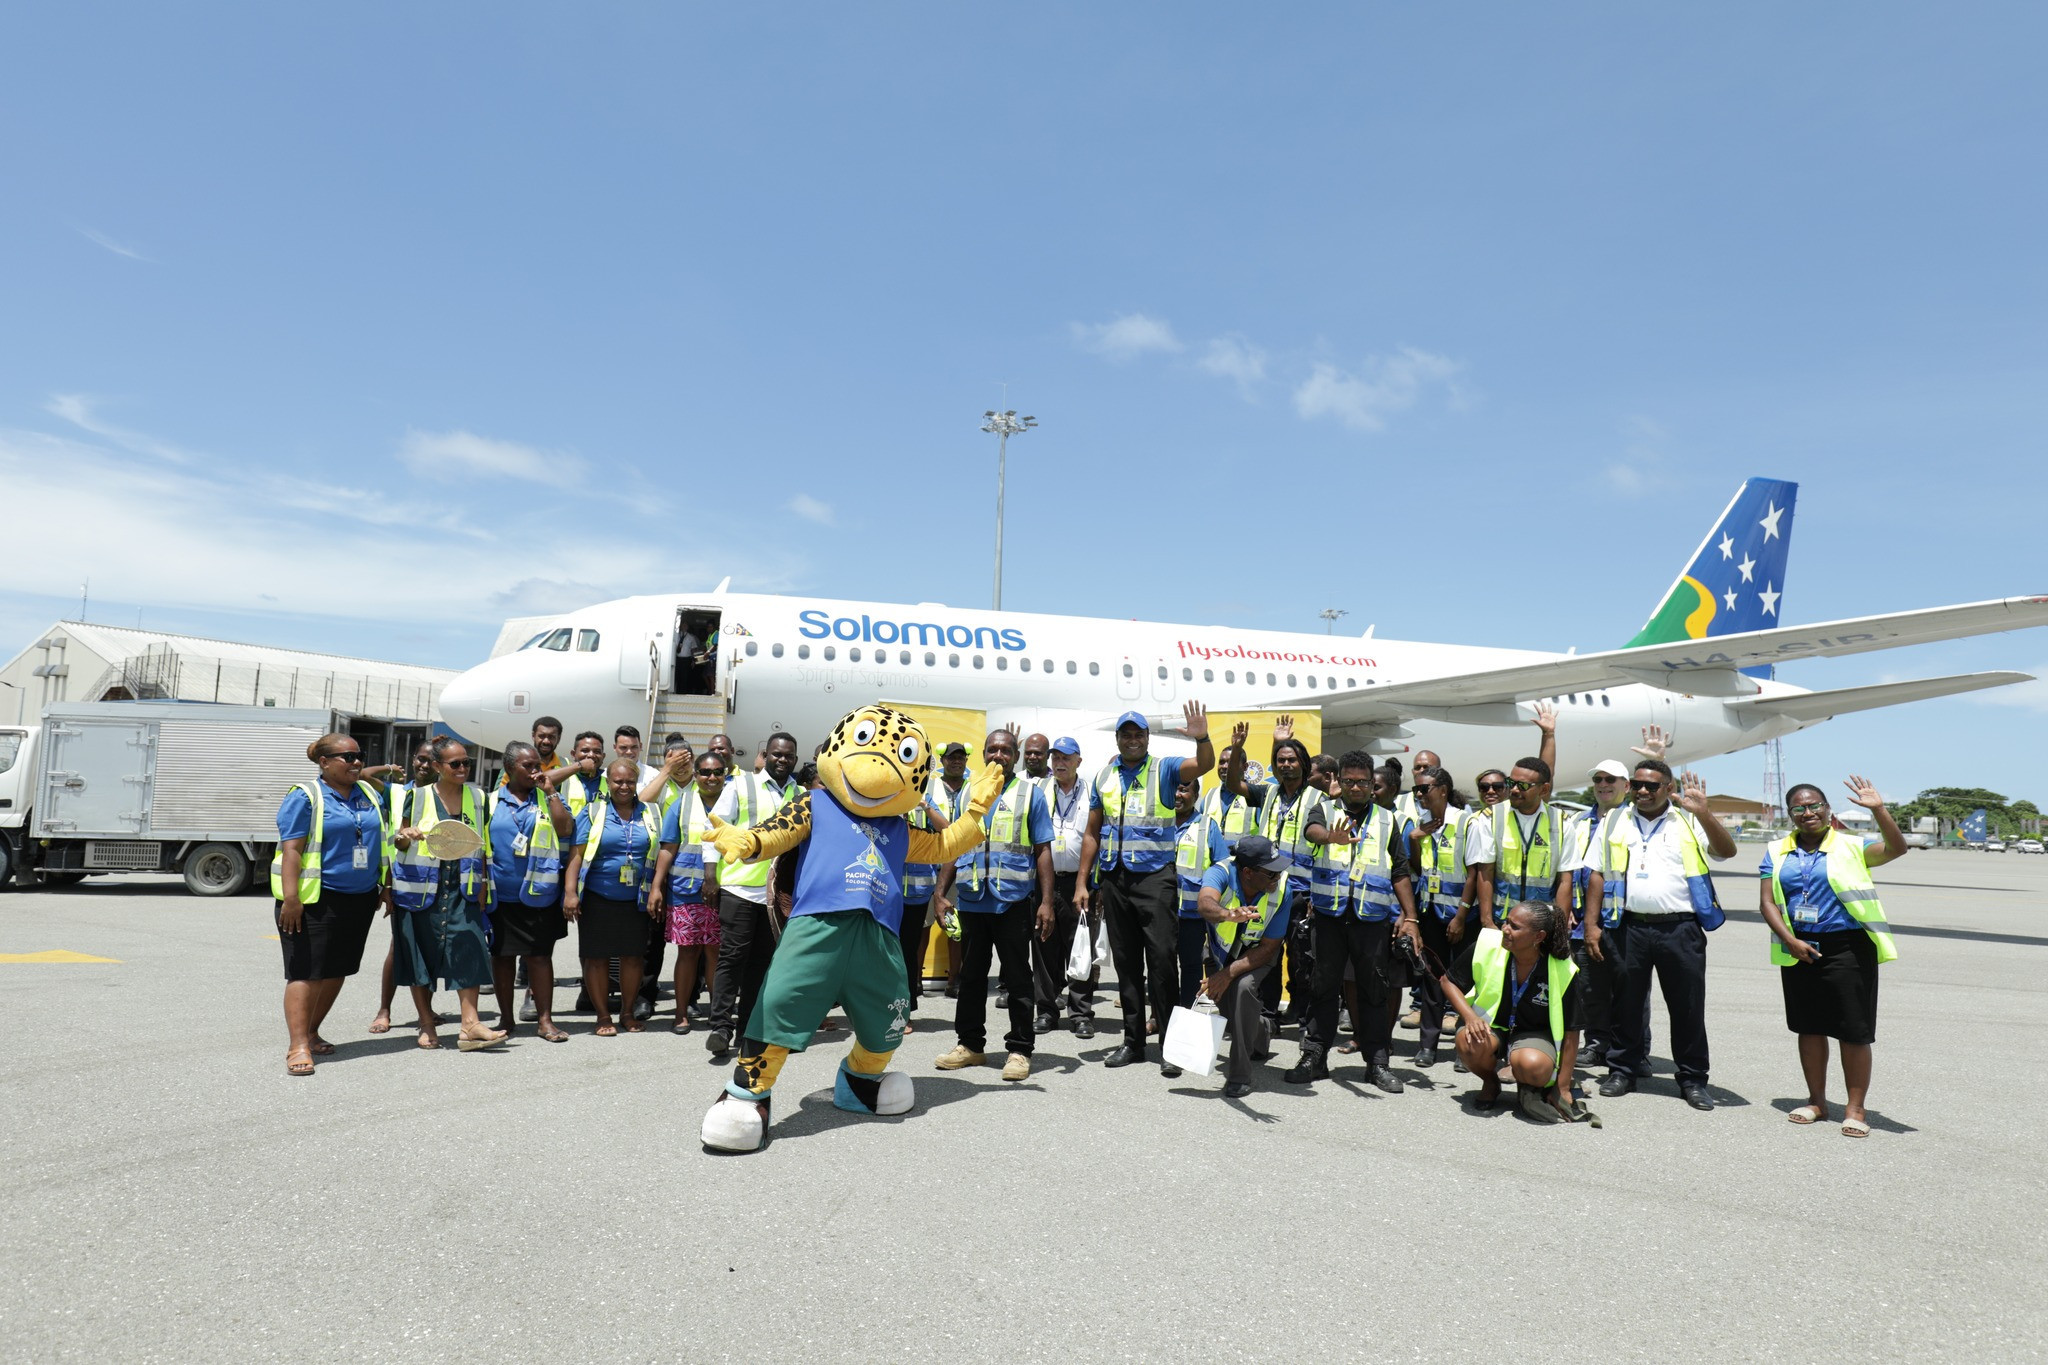 Solomon Islands 2023 mascot Solo joined airline staff in Honiara to celebrate the sponsorship which will also offer logistical support for the Games Baton Relay ©Solomon Islands 2023